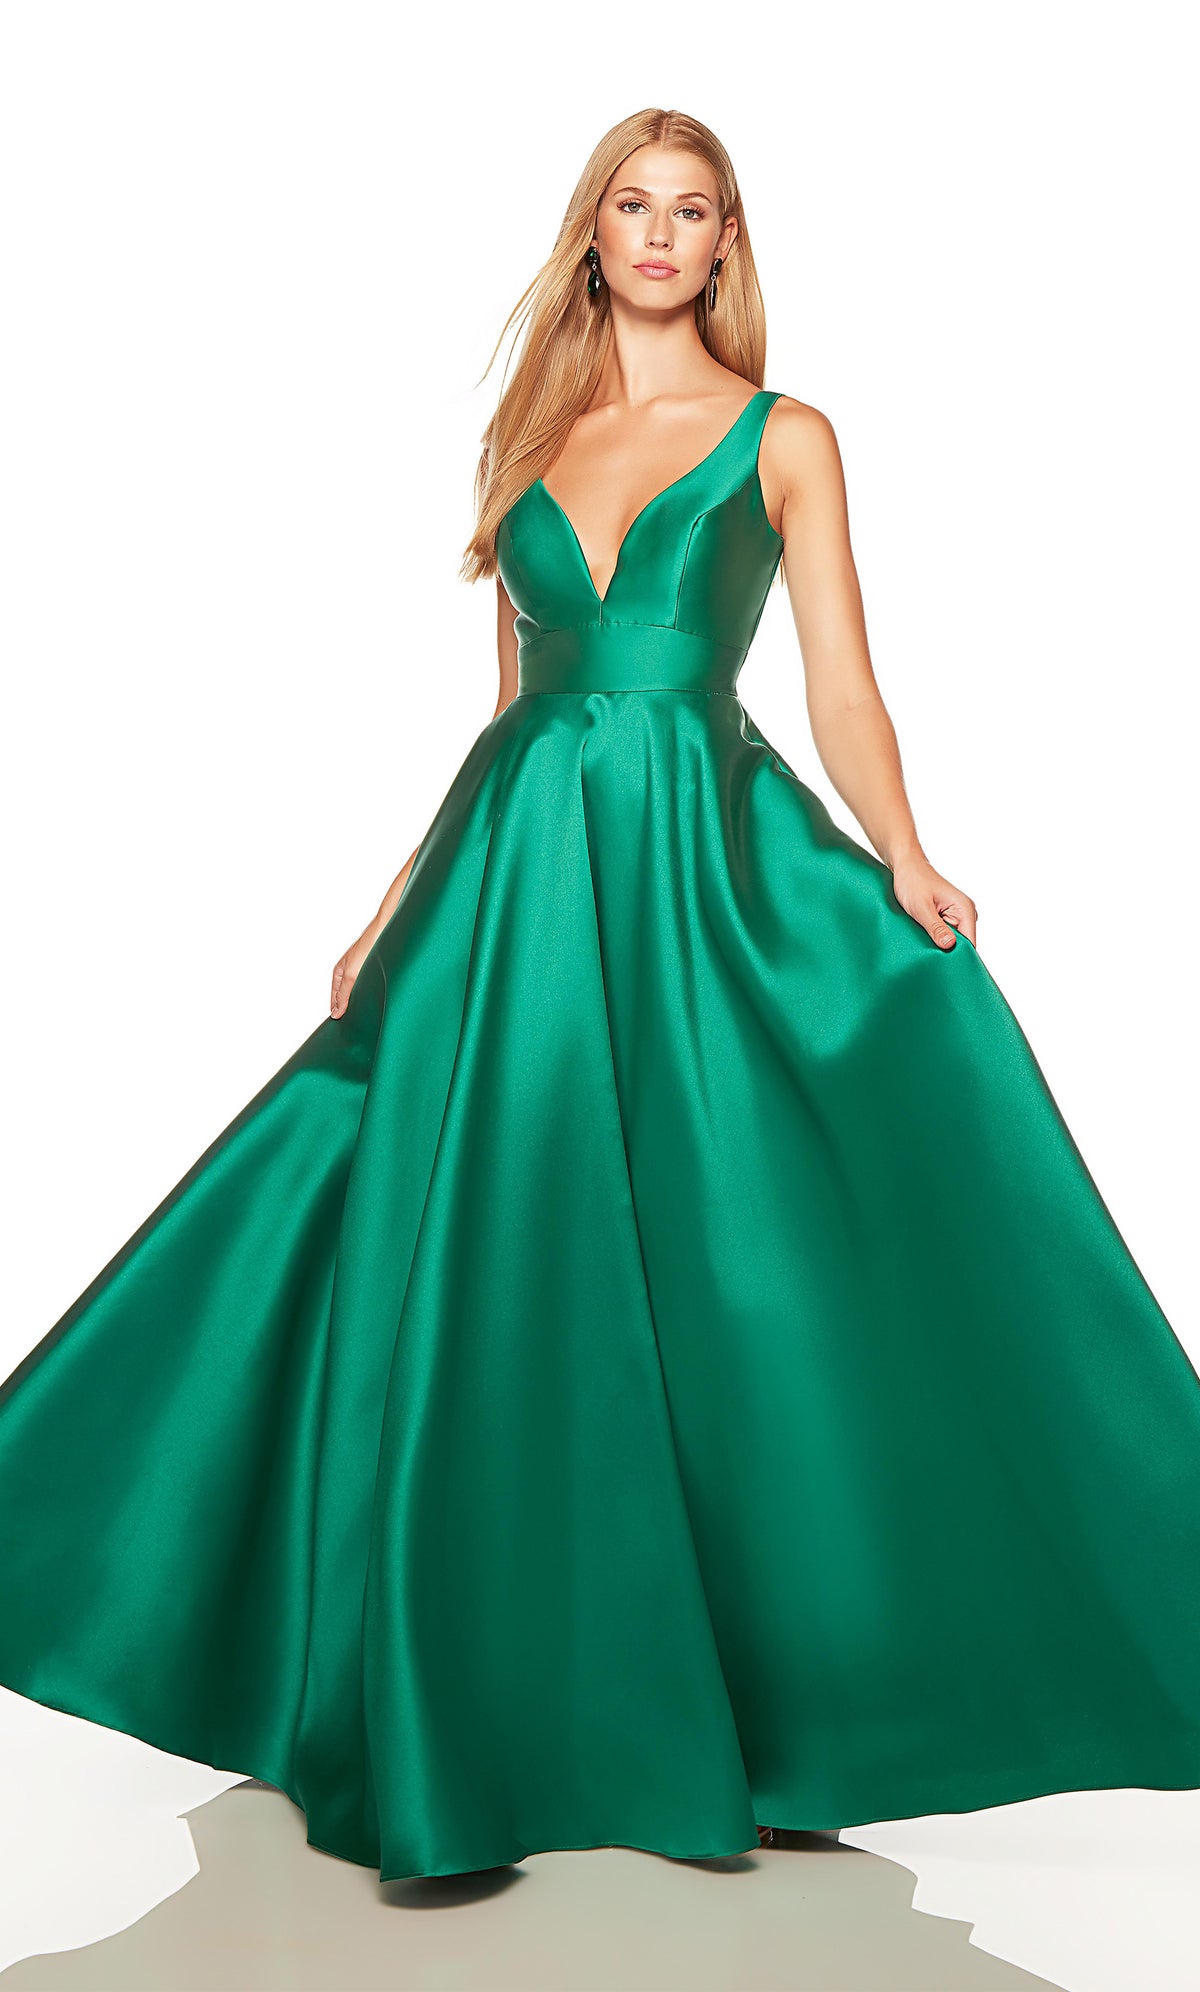 Green ballgown with a plunging neckline and pockets.